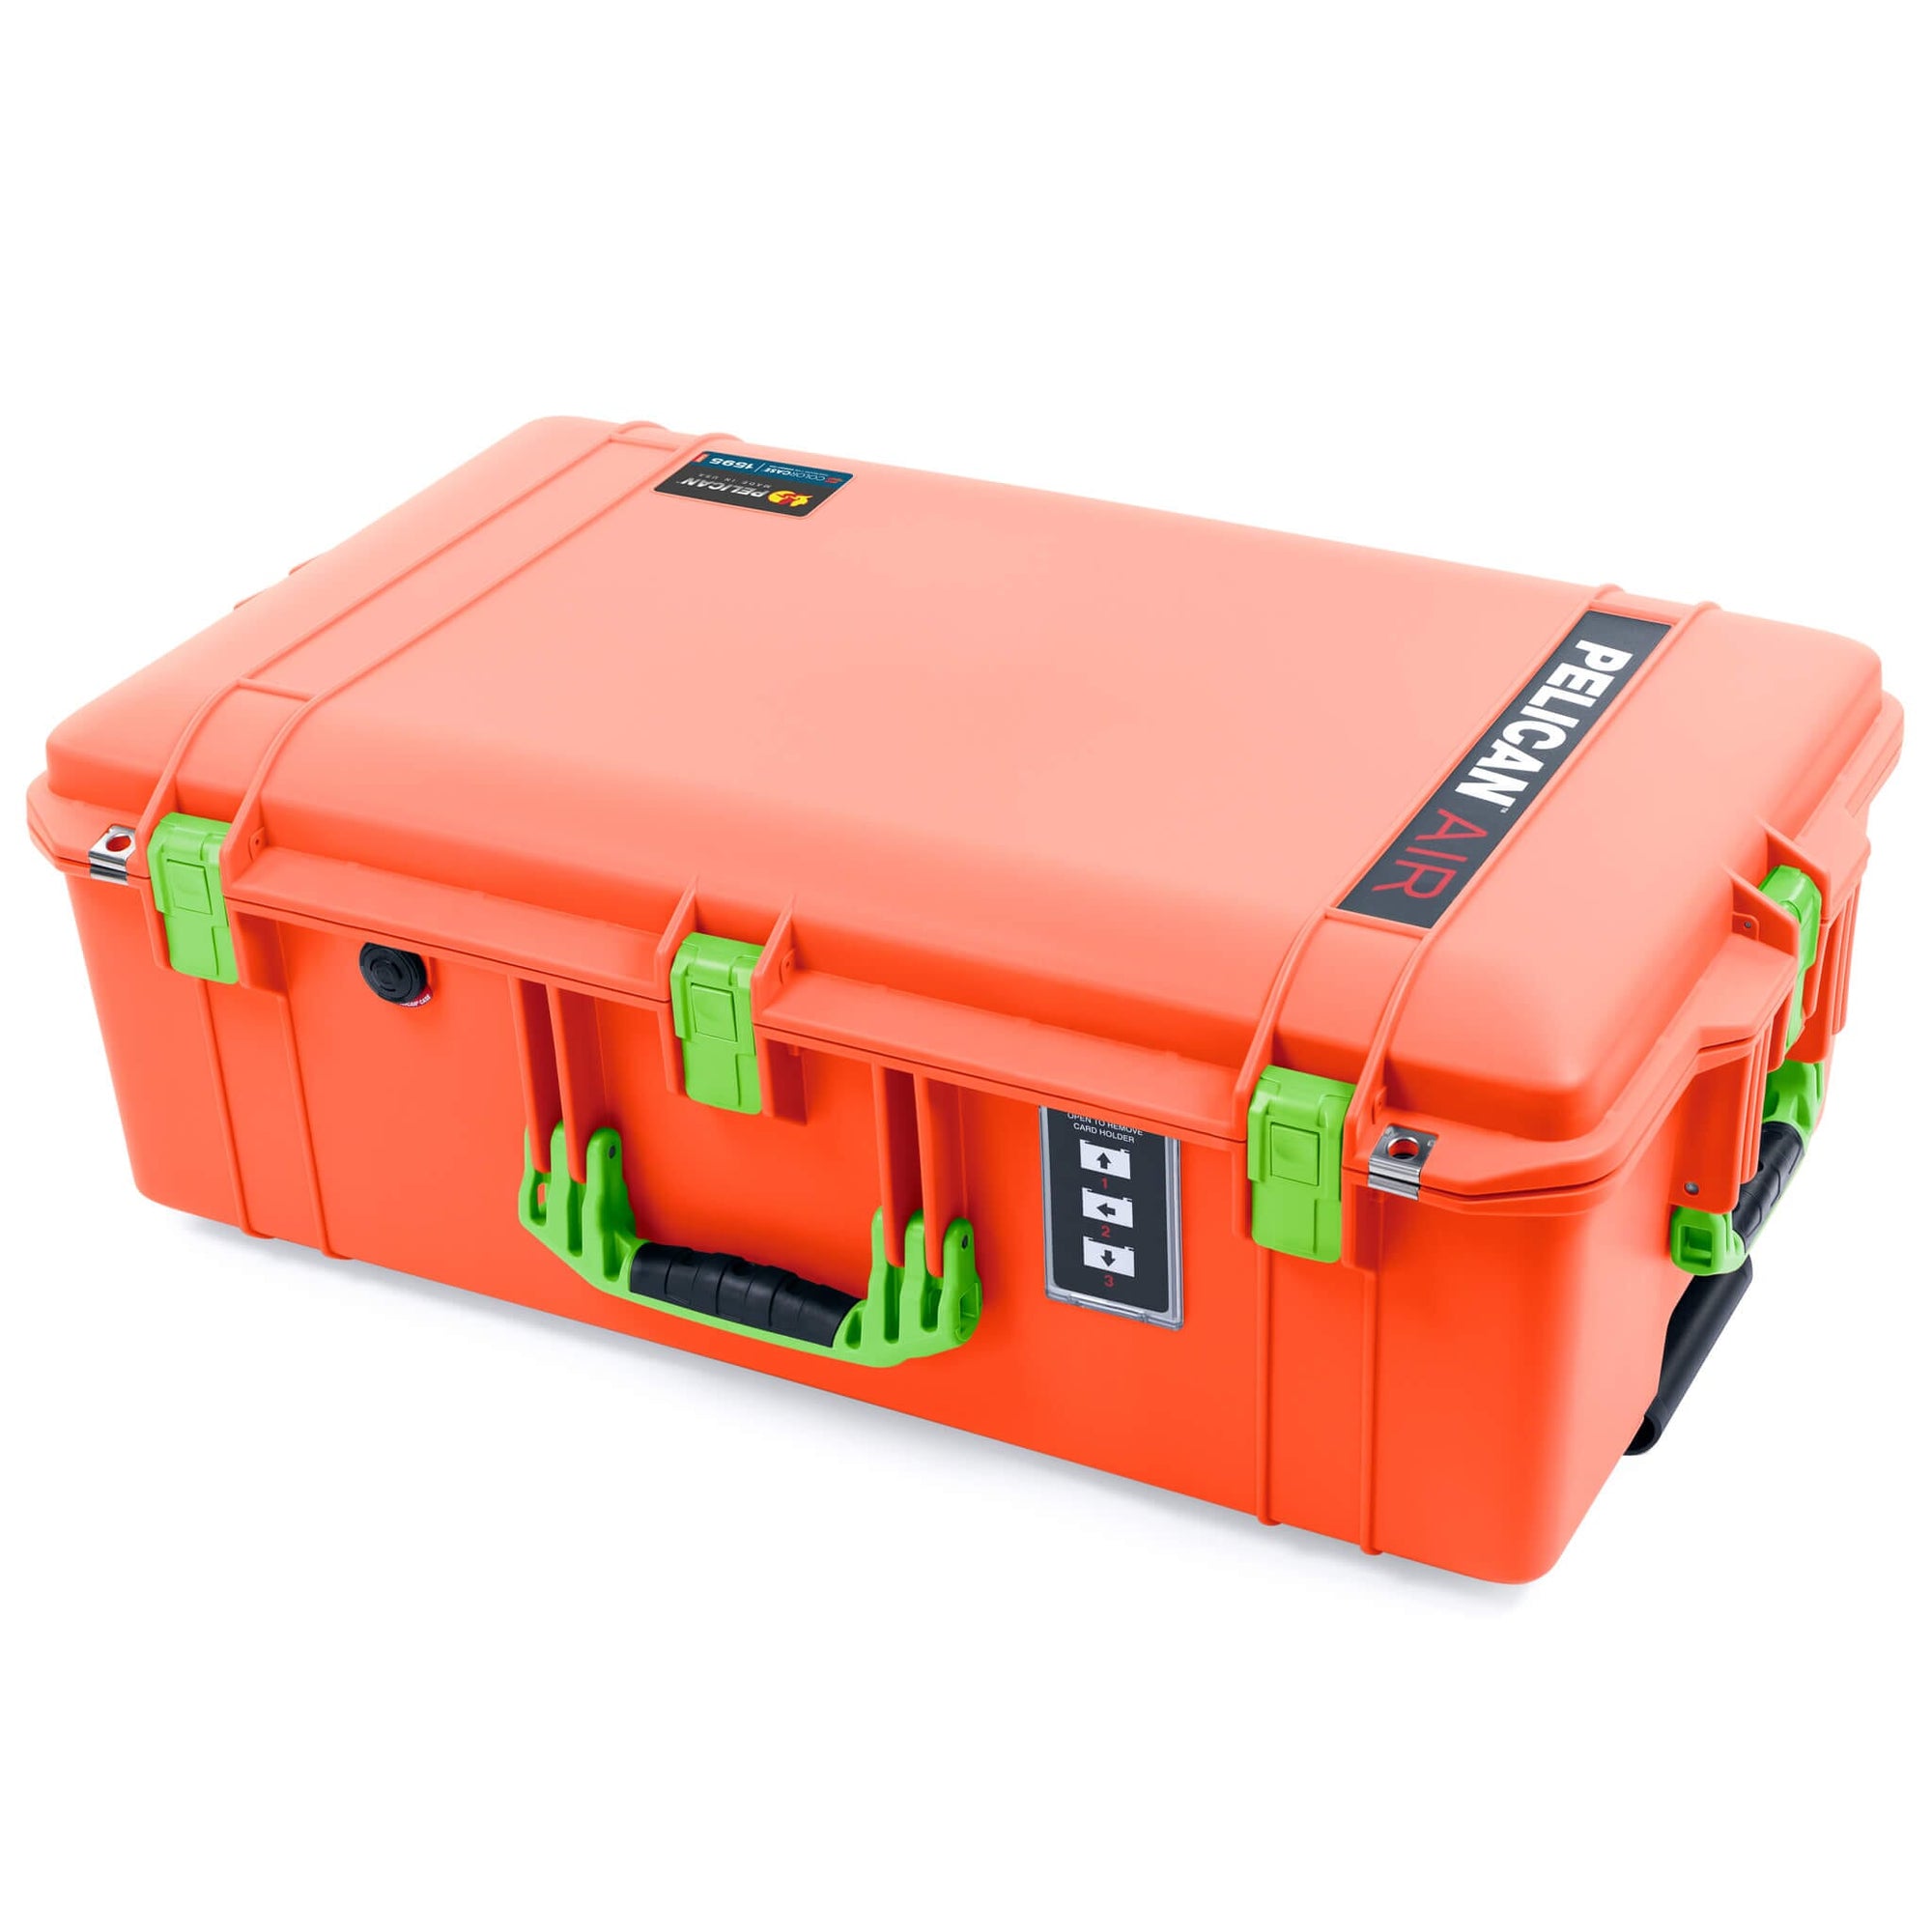 Pelican 1595 Air Case, Orange with Lime Green Handles & Latches ColorCase 